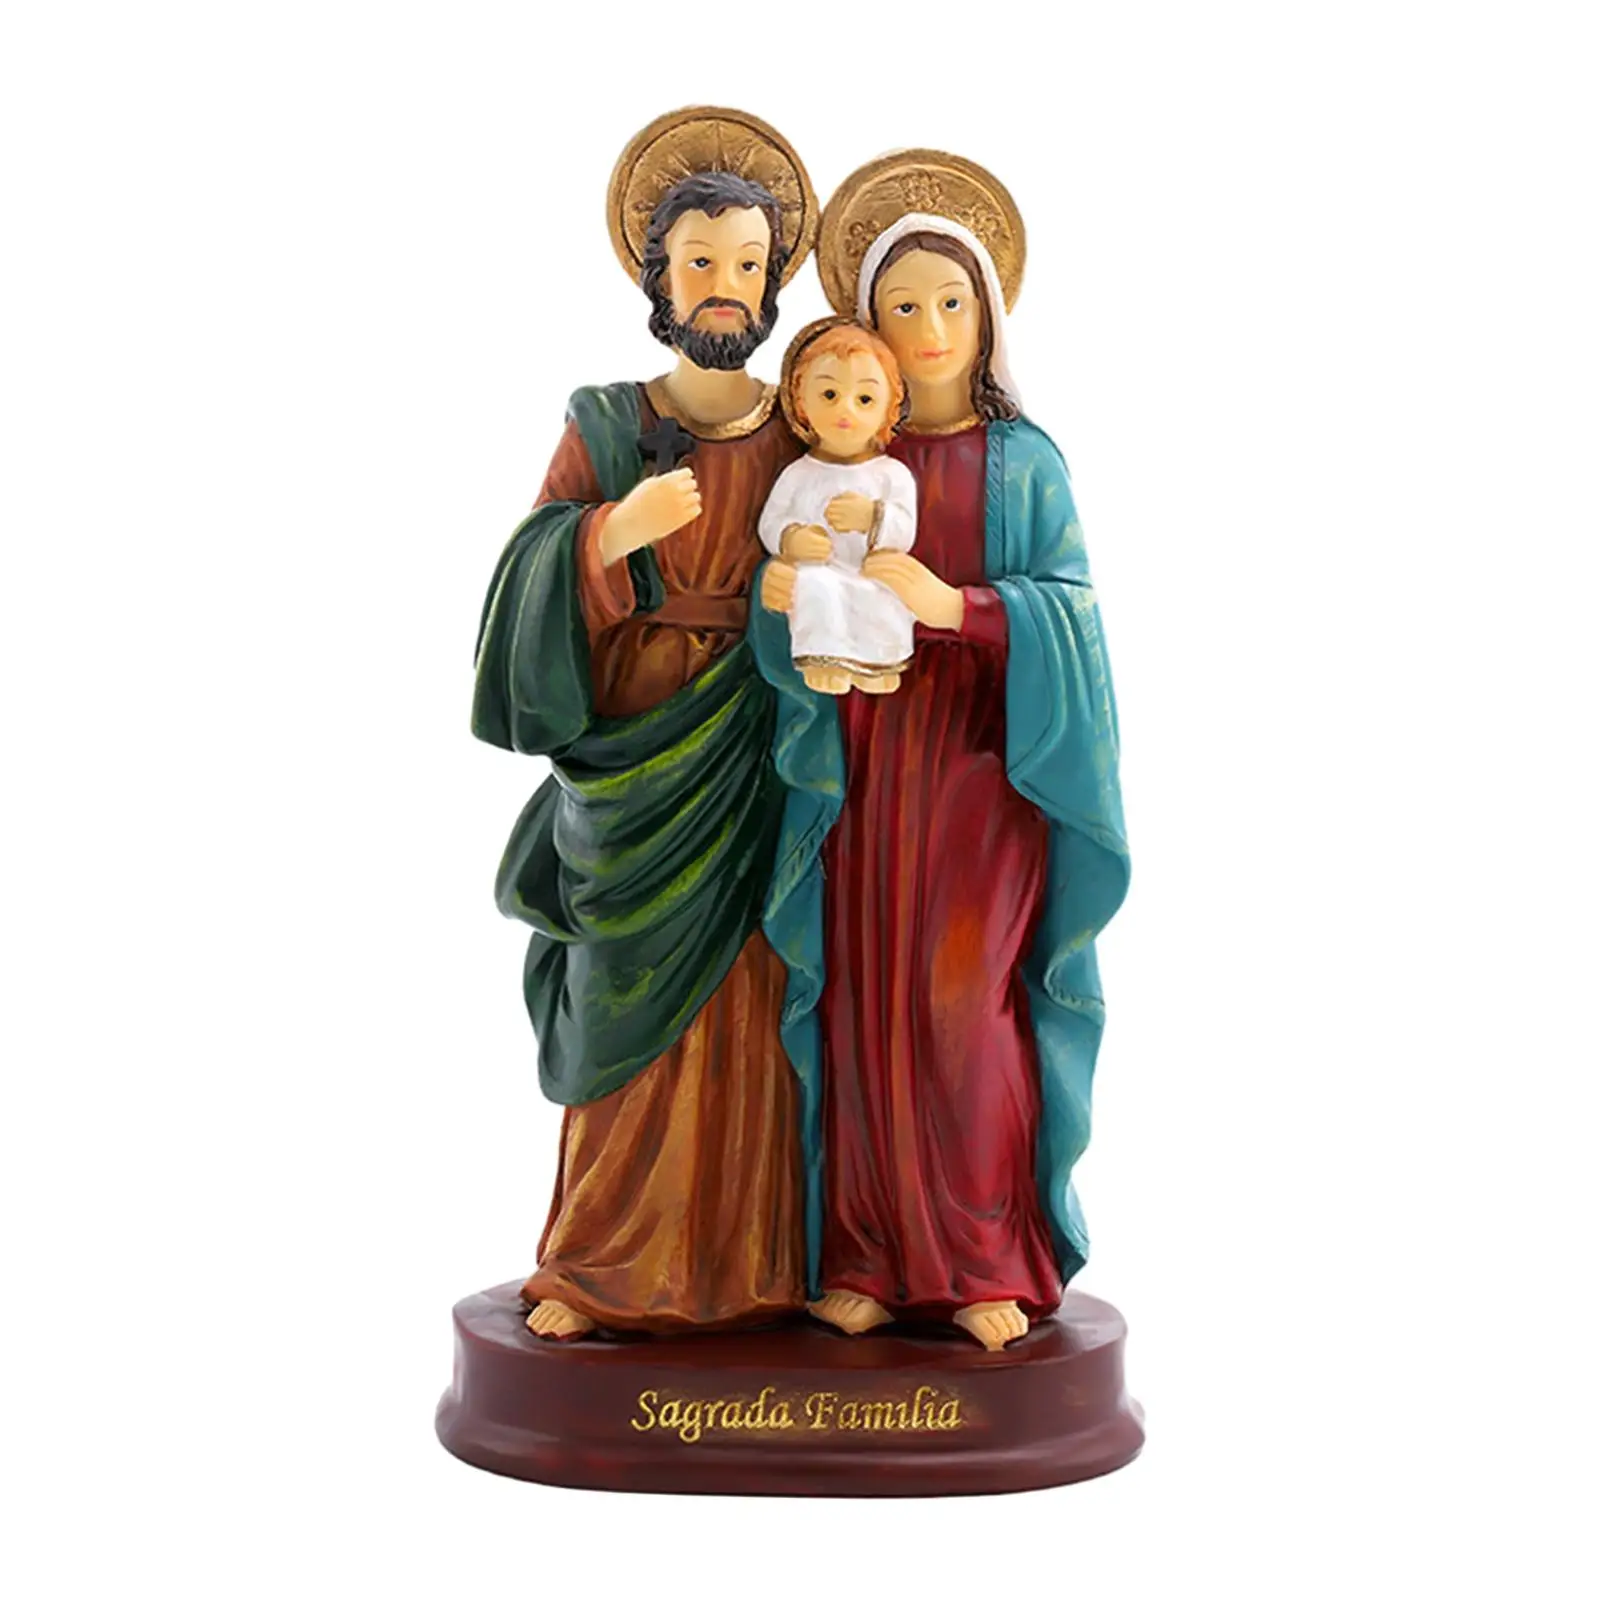 Holy Family Statue Jesus Figurine Art Collectible Sculpture Mary Joseph Figures for Office Desktop Christmas Decoration Ornament